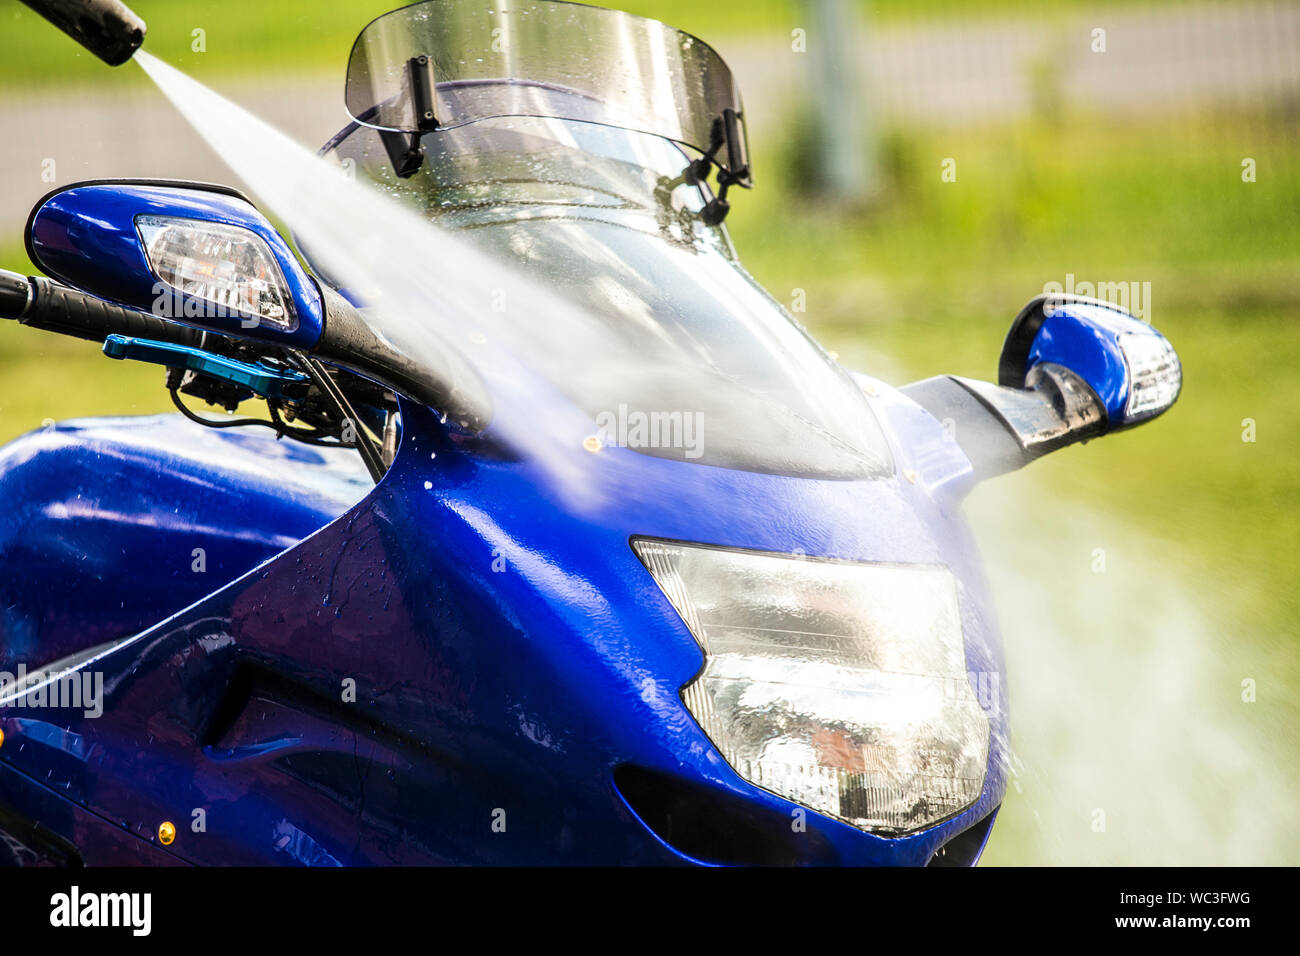 Close up view of using pressure washer to clean motorbike in home garden, green grass on background, summer day. Stock Photo